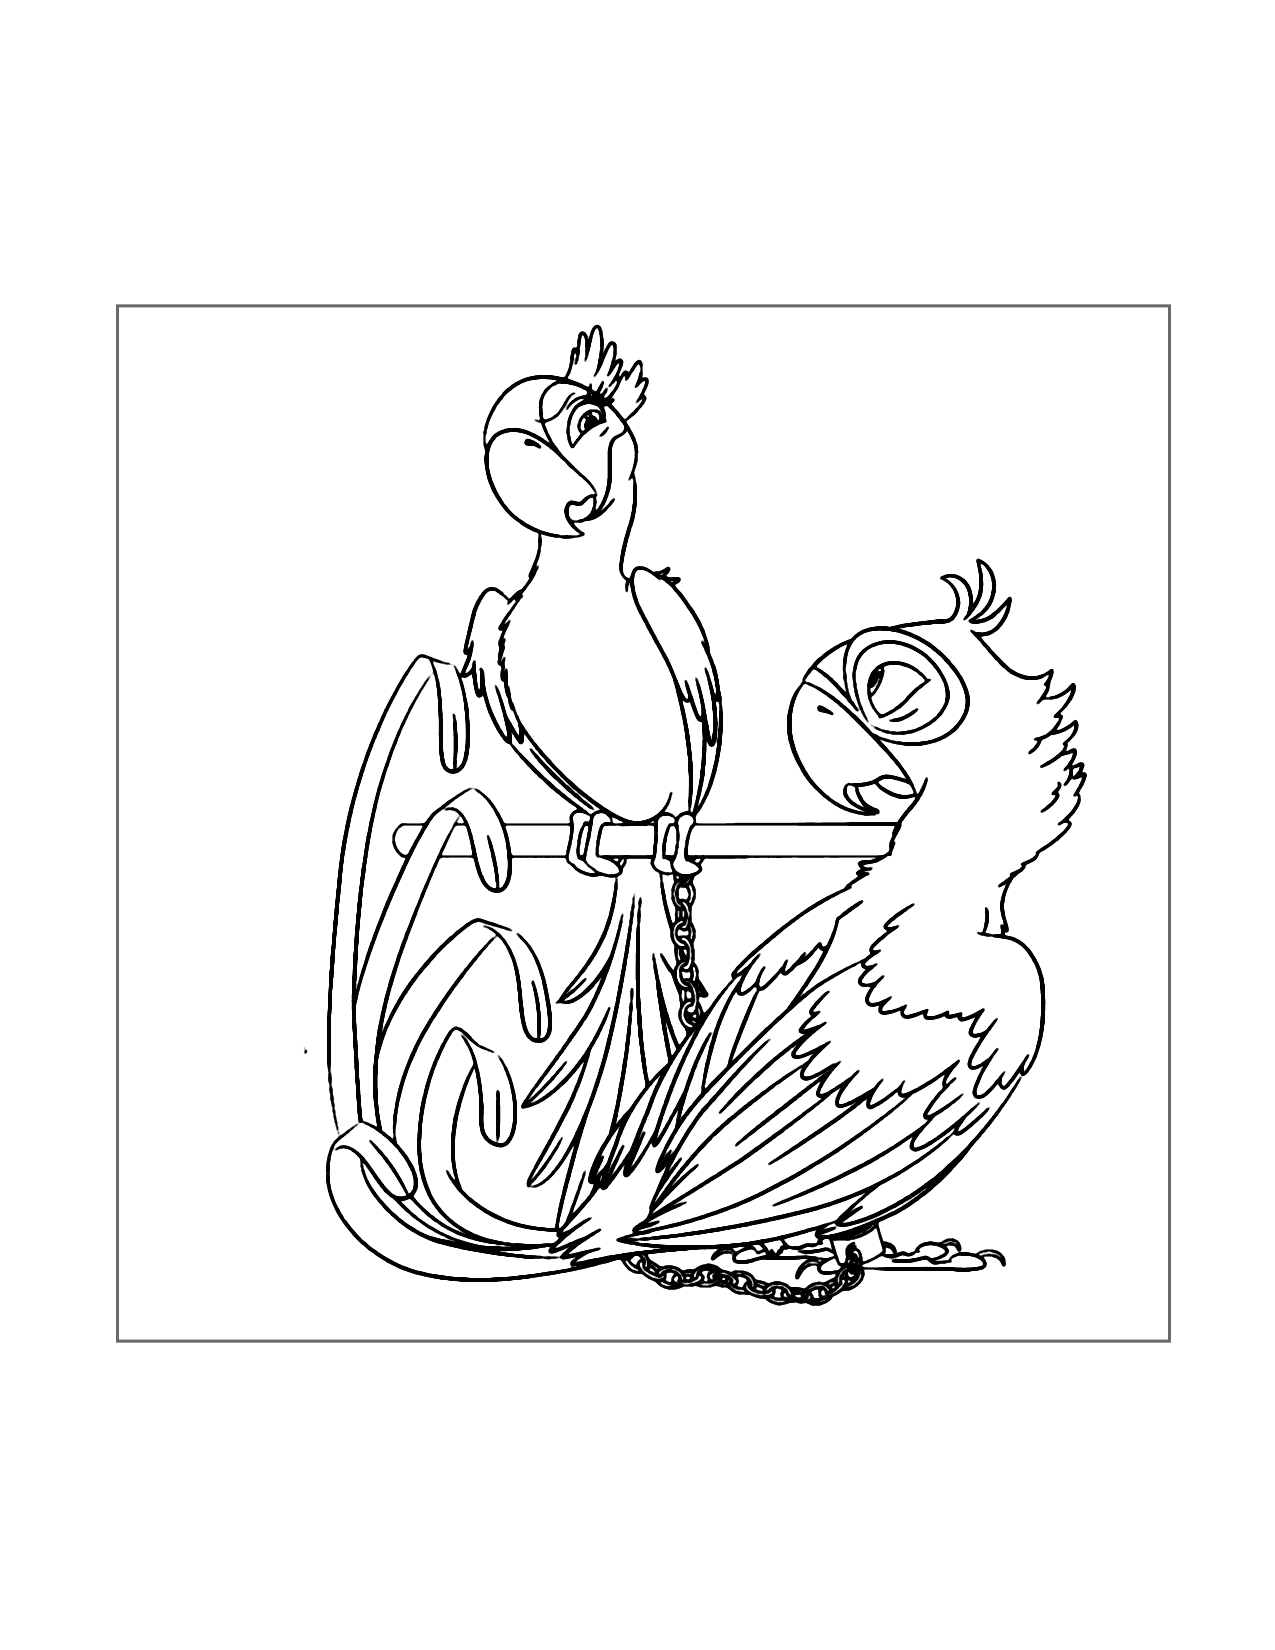 Jewel And Blu Are Chained Rio Coloring Page